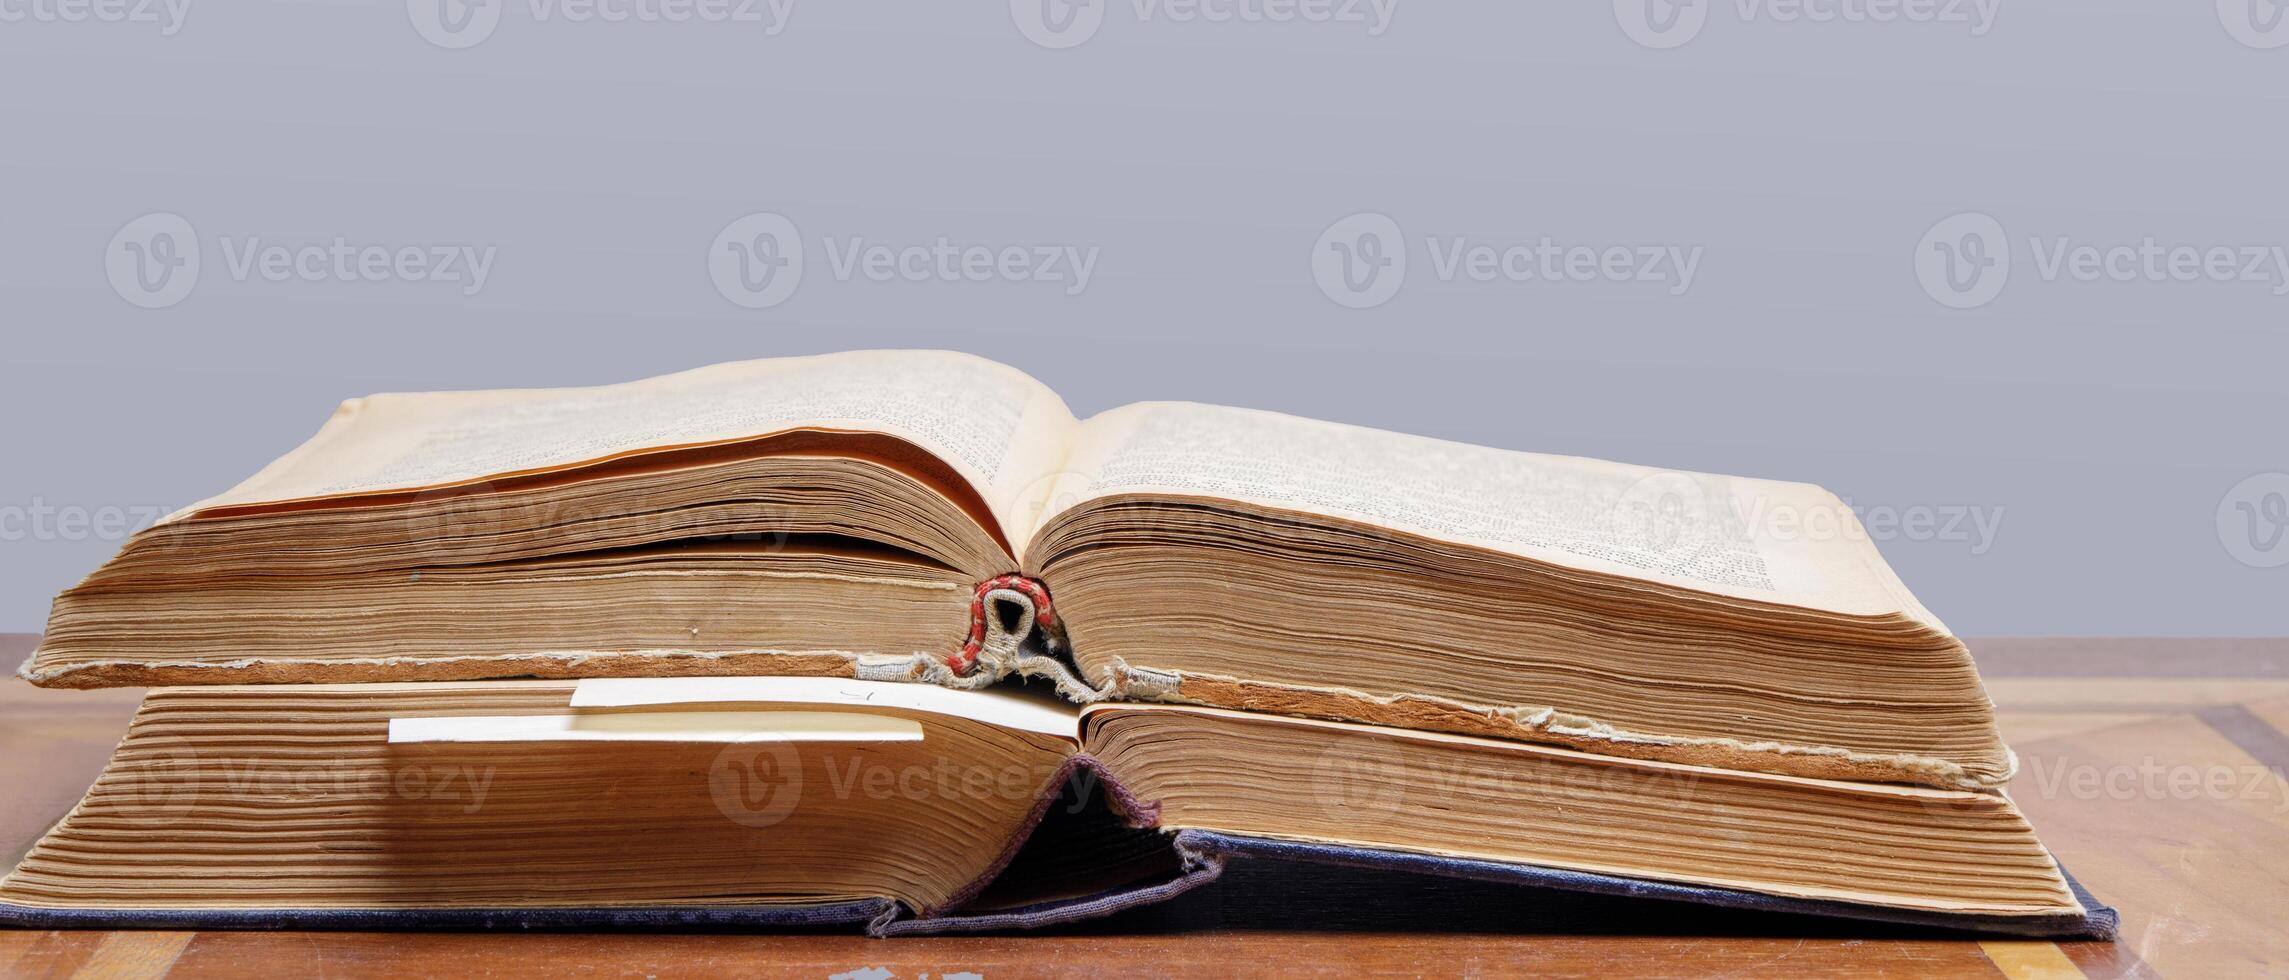 two old open books with bookmarks lie on a wooden table, close-up. High quality photo